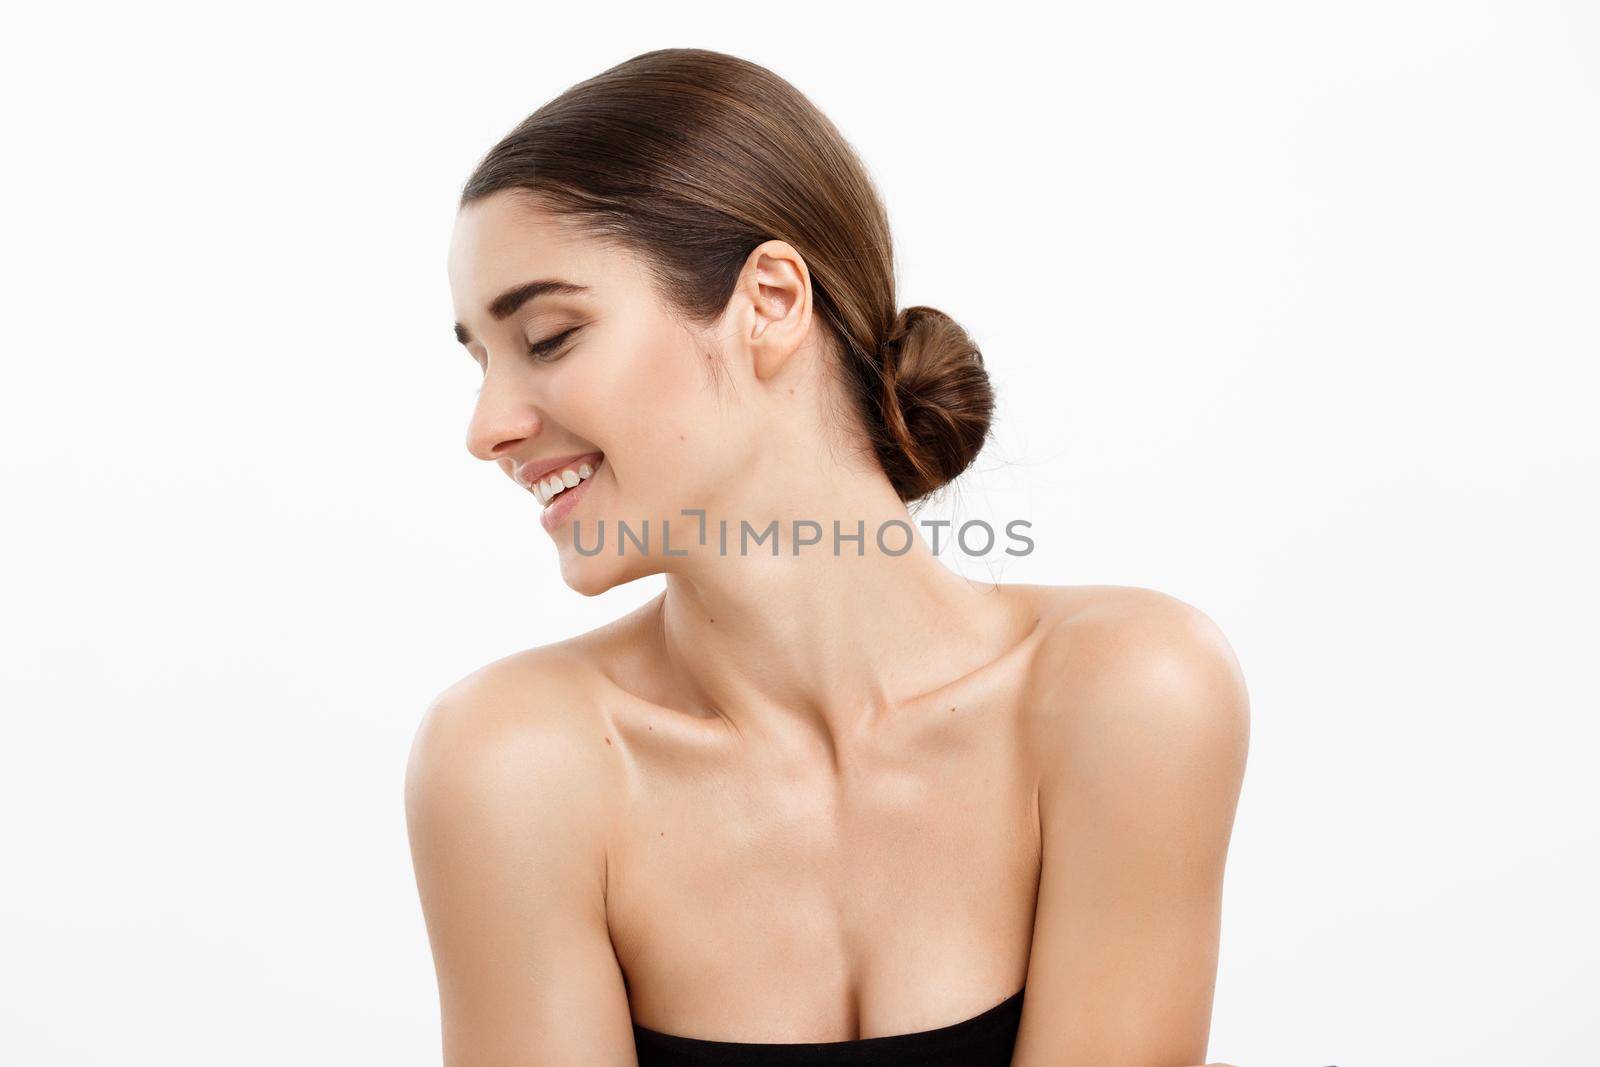 Health care and spa concept - attractive young and healthy woman with nude makeup on white background